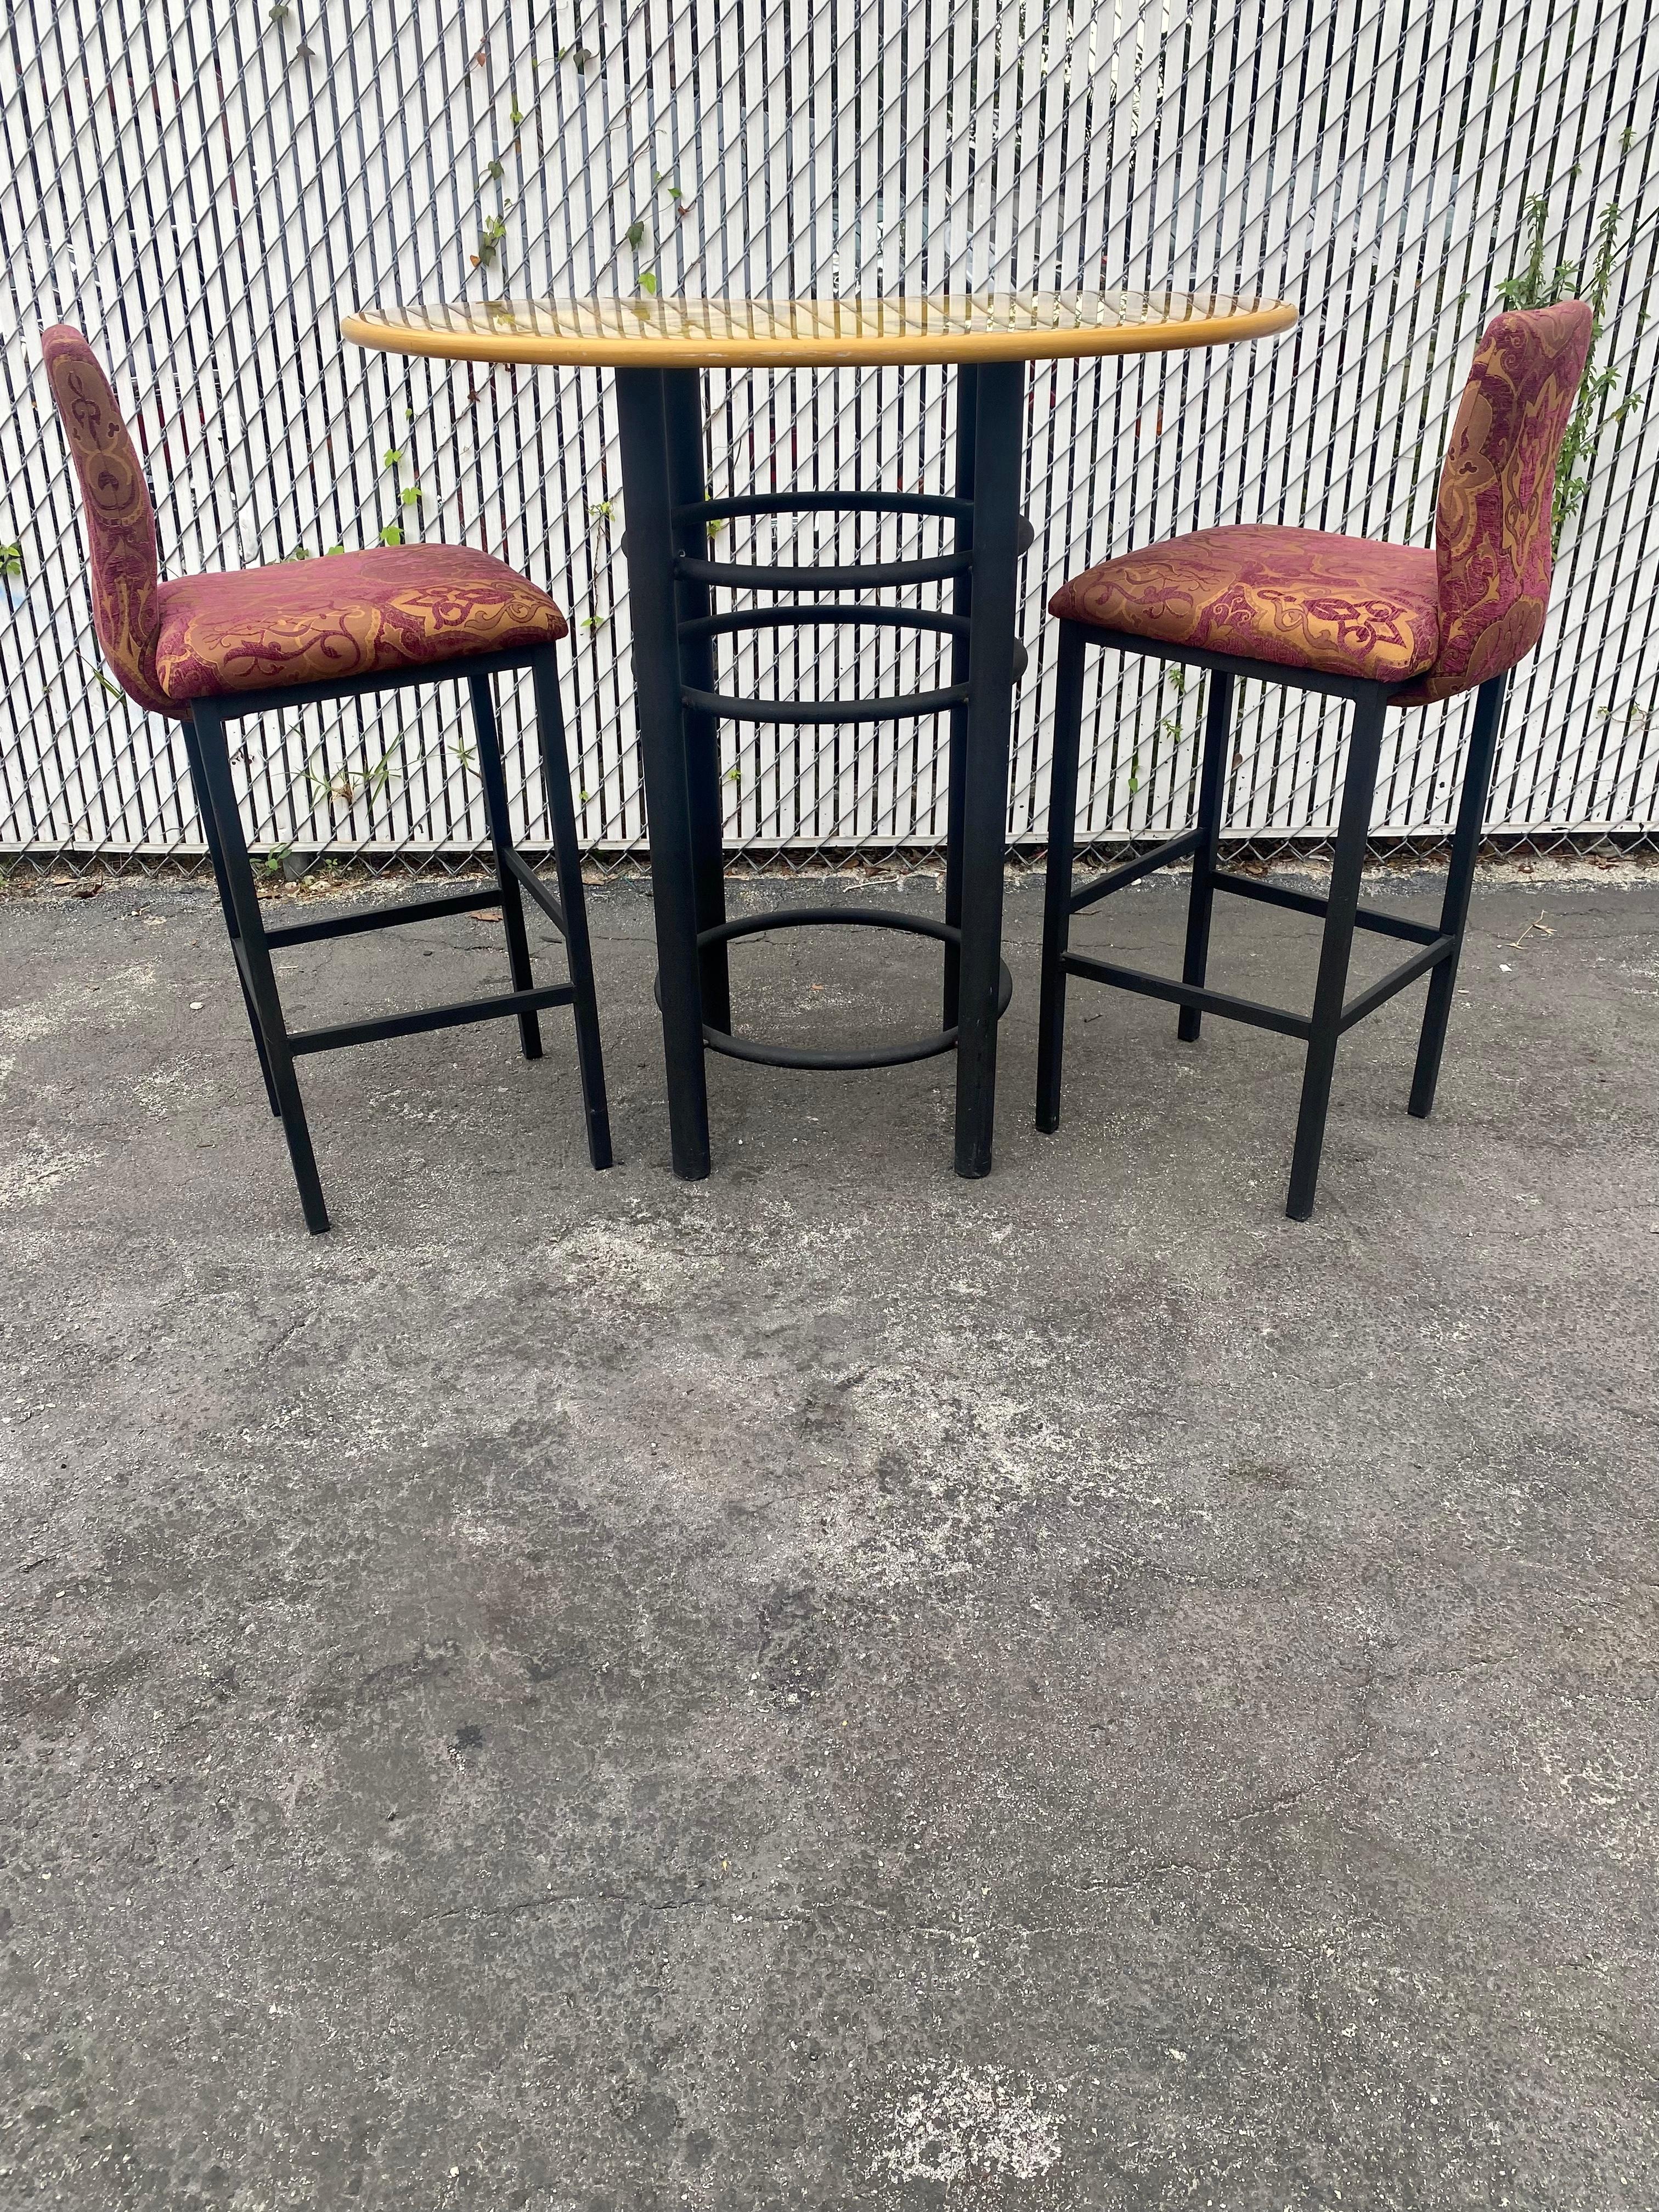 1980s Artistic Kidney Bar Pub Dining Table and Chairs, Set of 3 For Sale 3